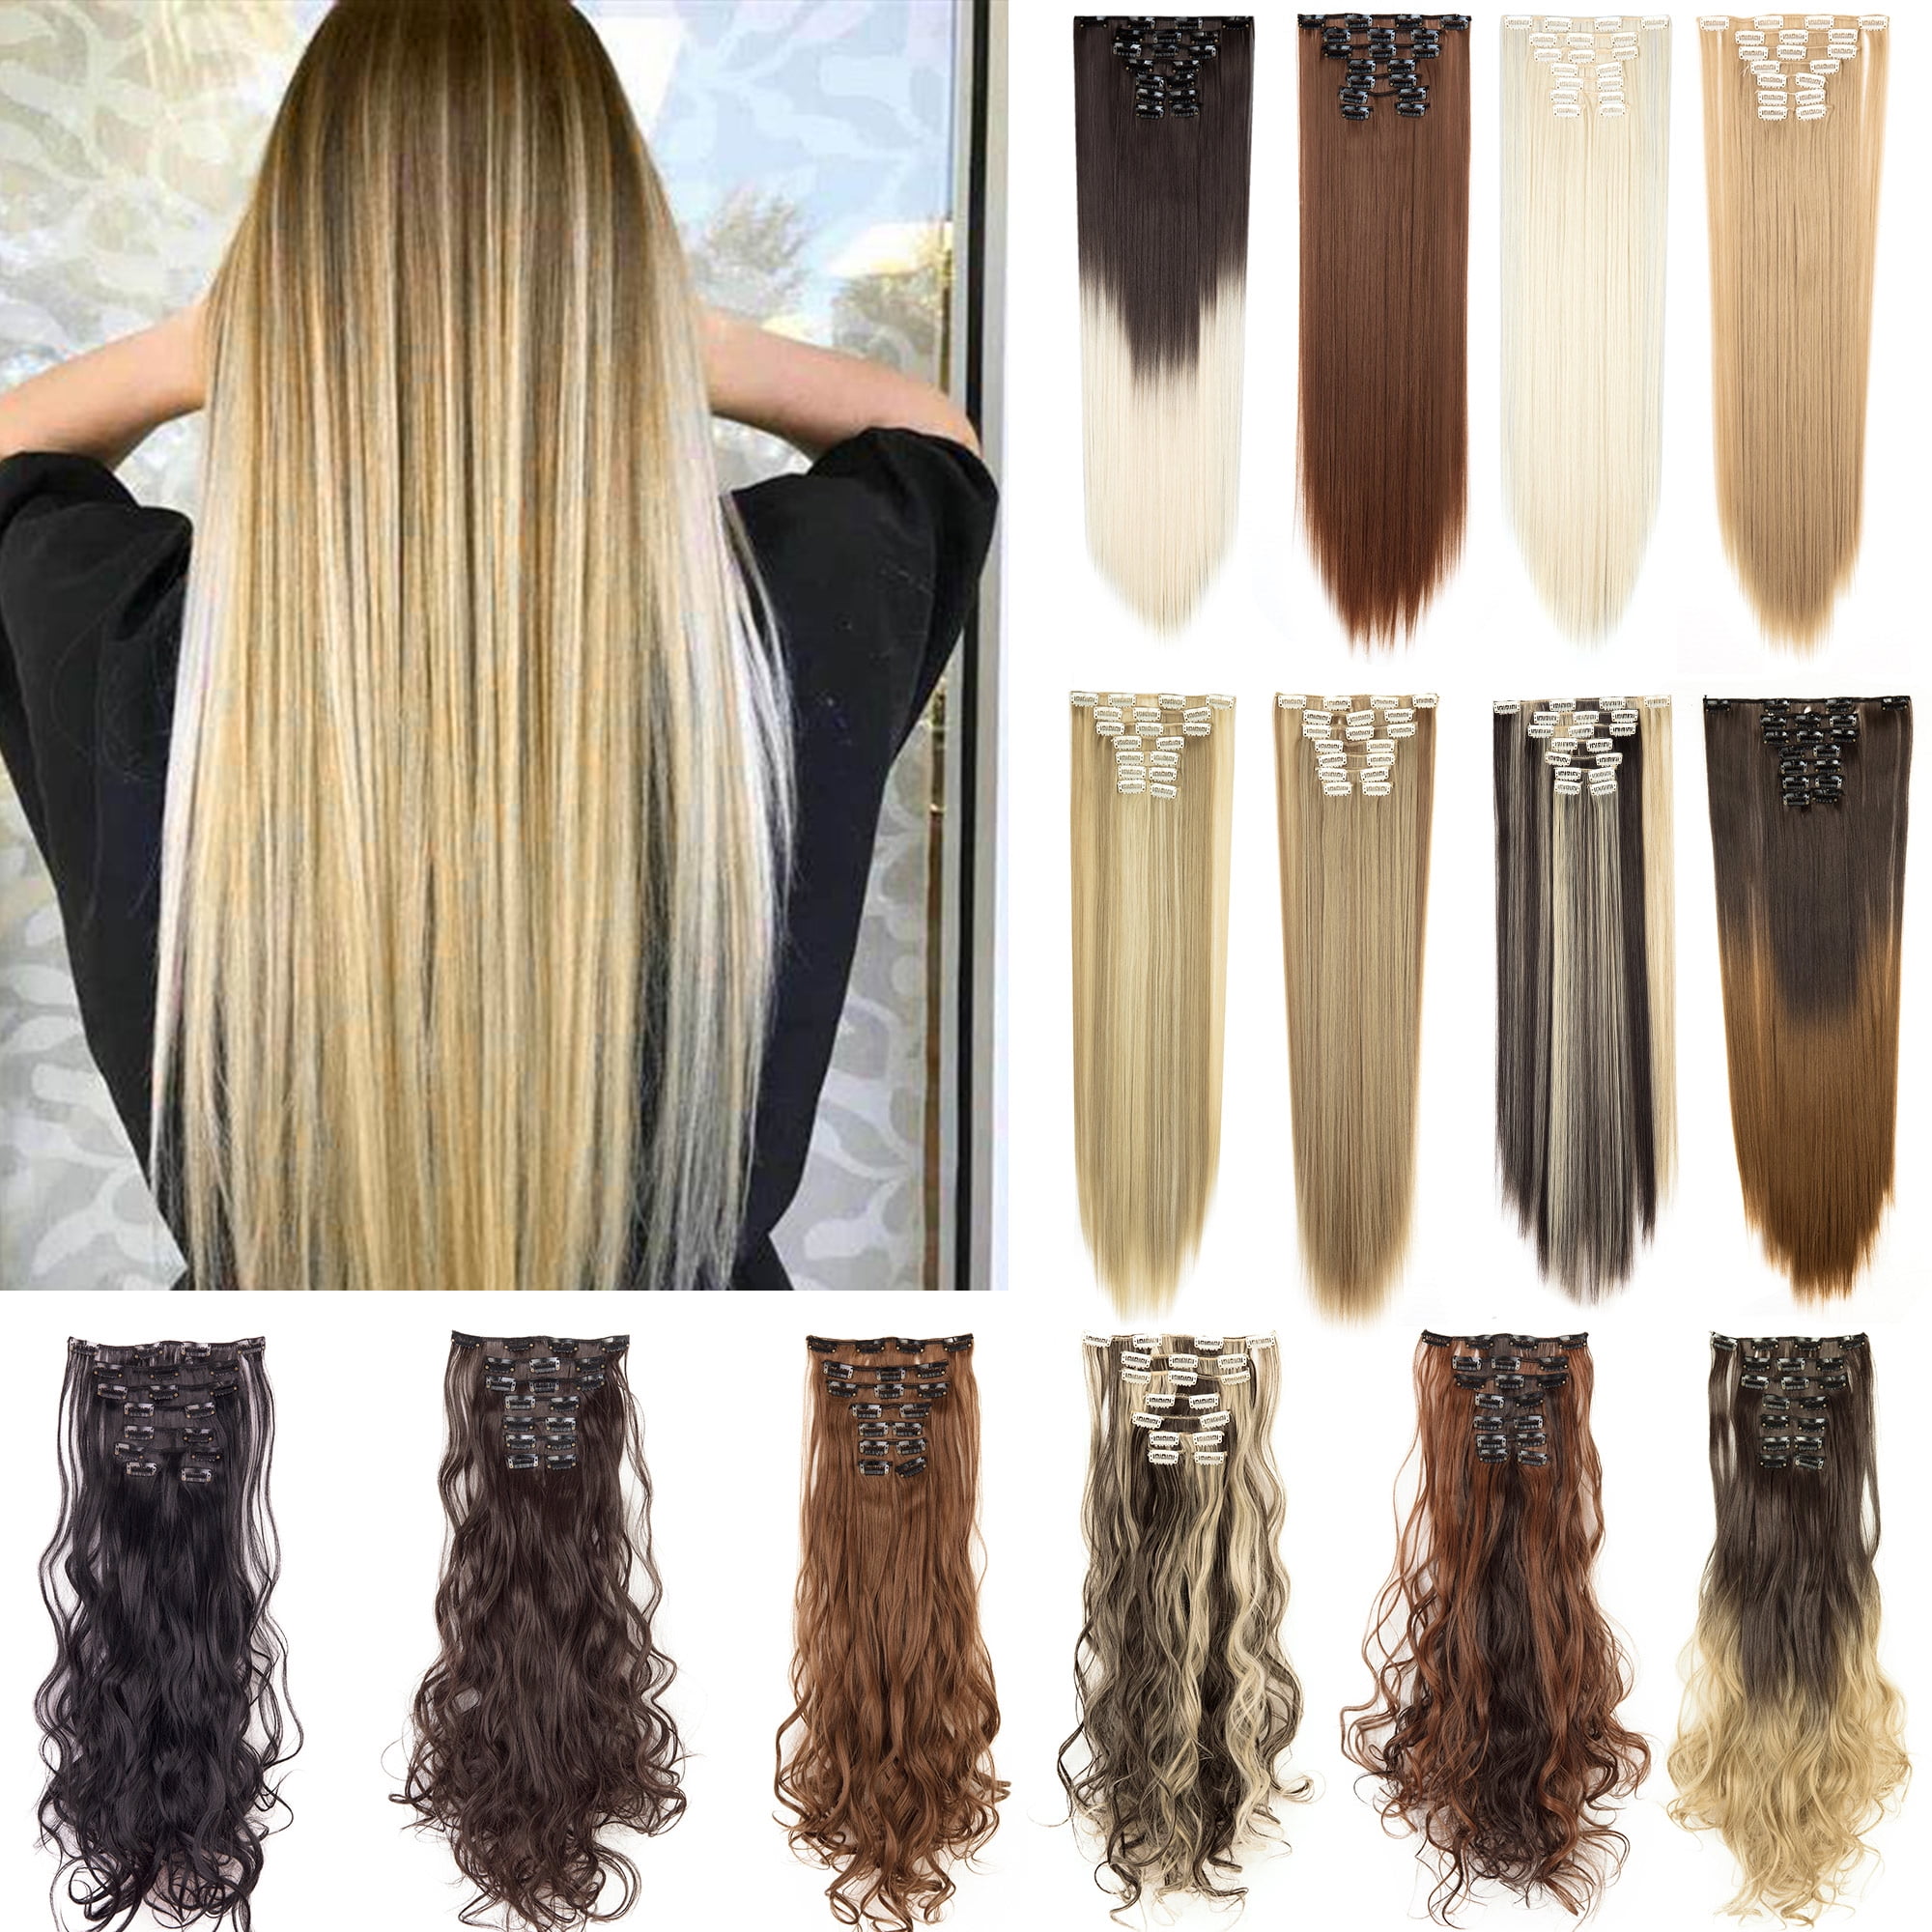 SHCKE Clip in Extensions 26 Inch Straight Synthetic Hair Extensions Ginger Brown Mix Double Weft Hair Extensions Hairpiece for Women - Walmart.com